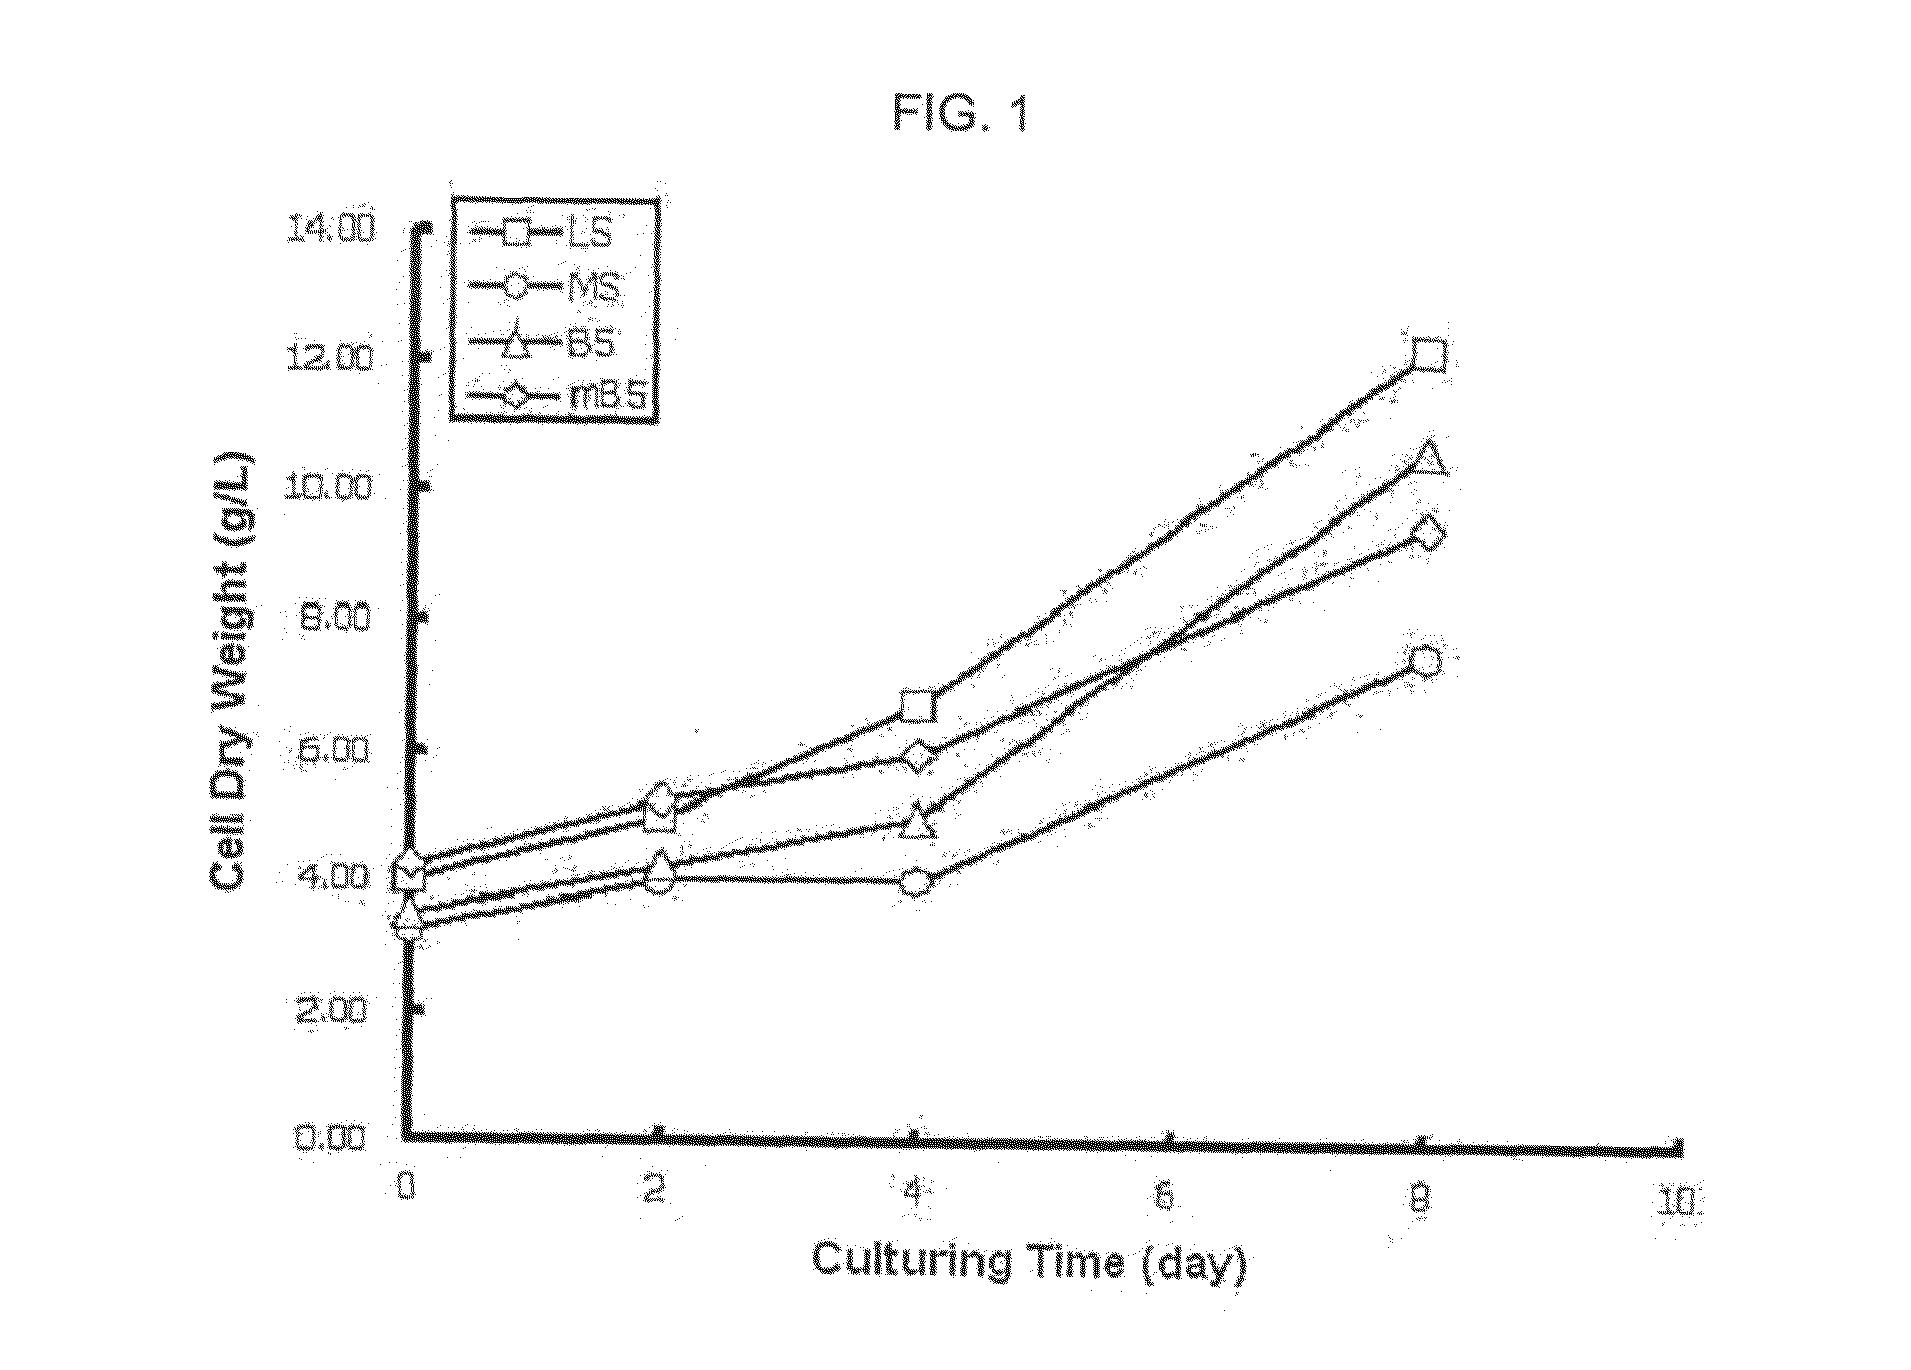 Method for production of corosolic acid in suspension culture of plant cells